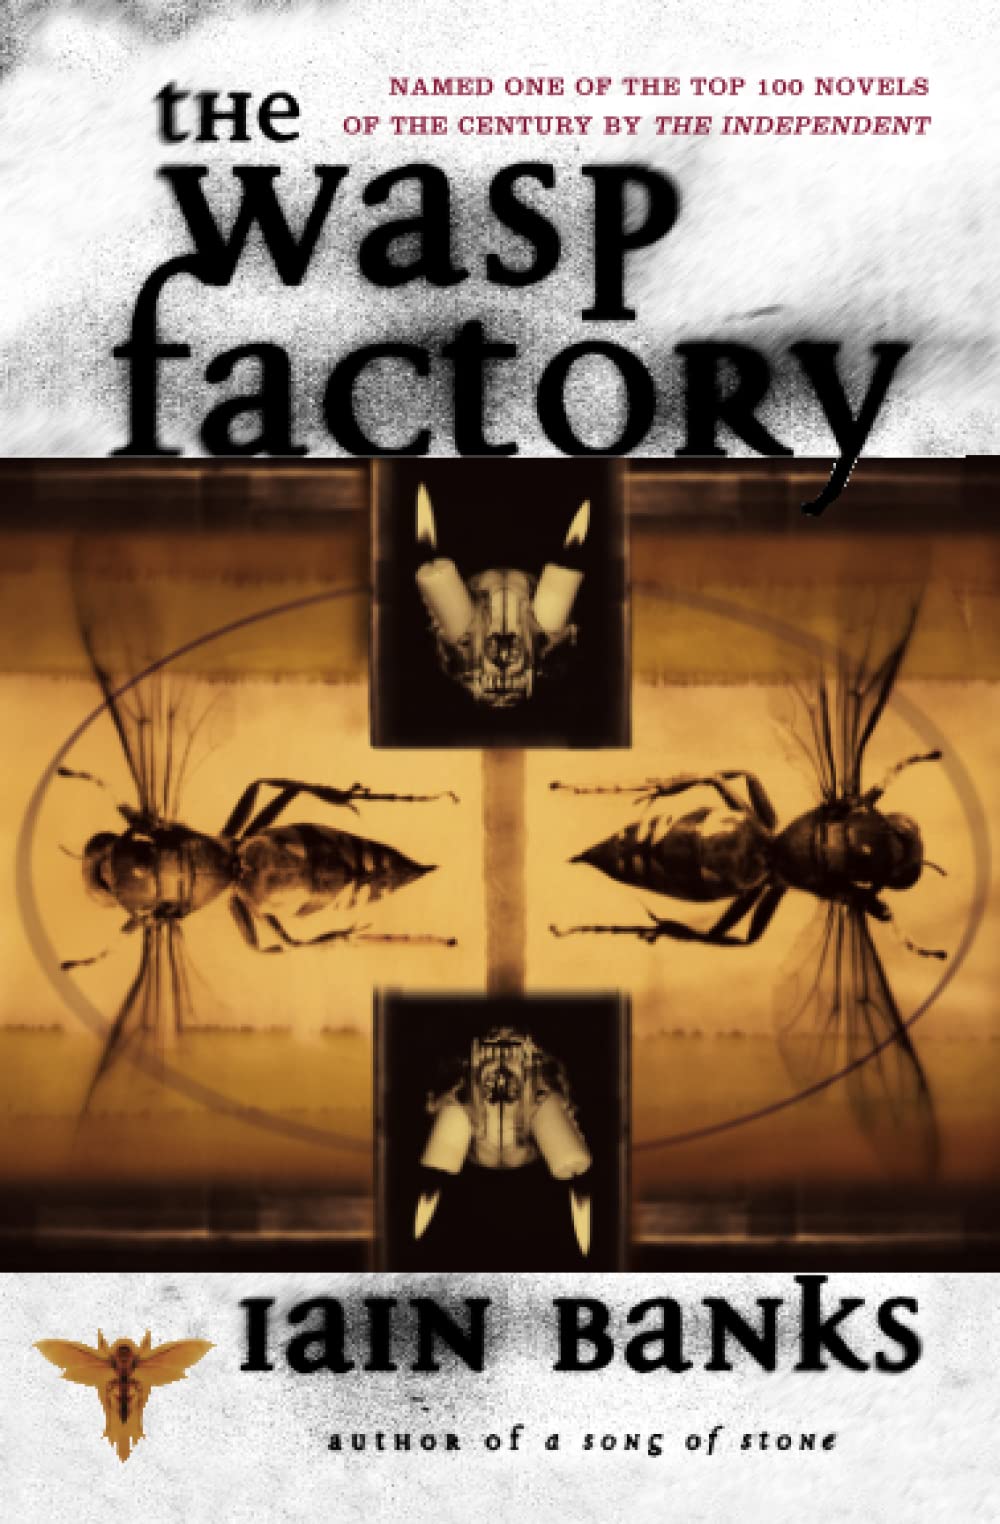 The WASP FACTORY: A NOVEL by Iain Banks